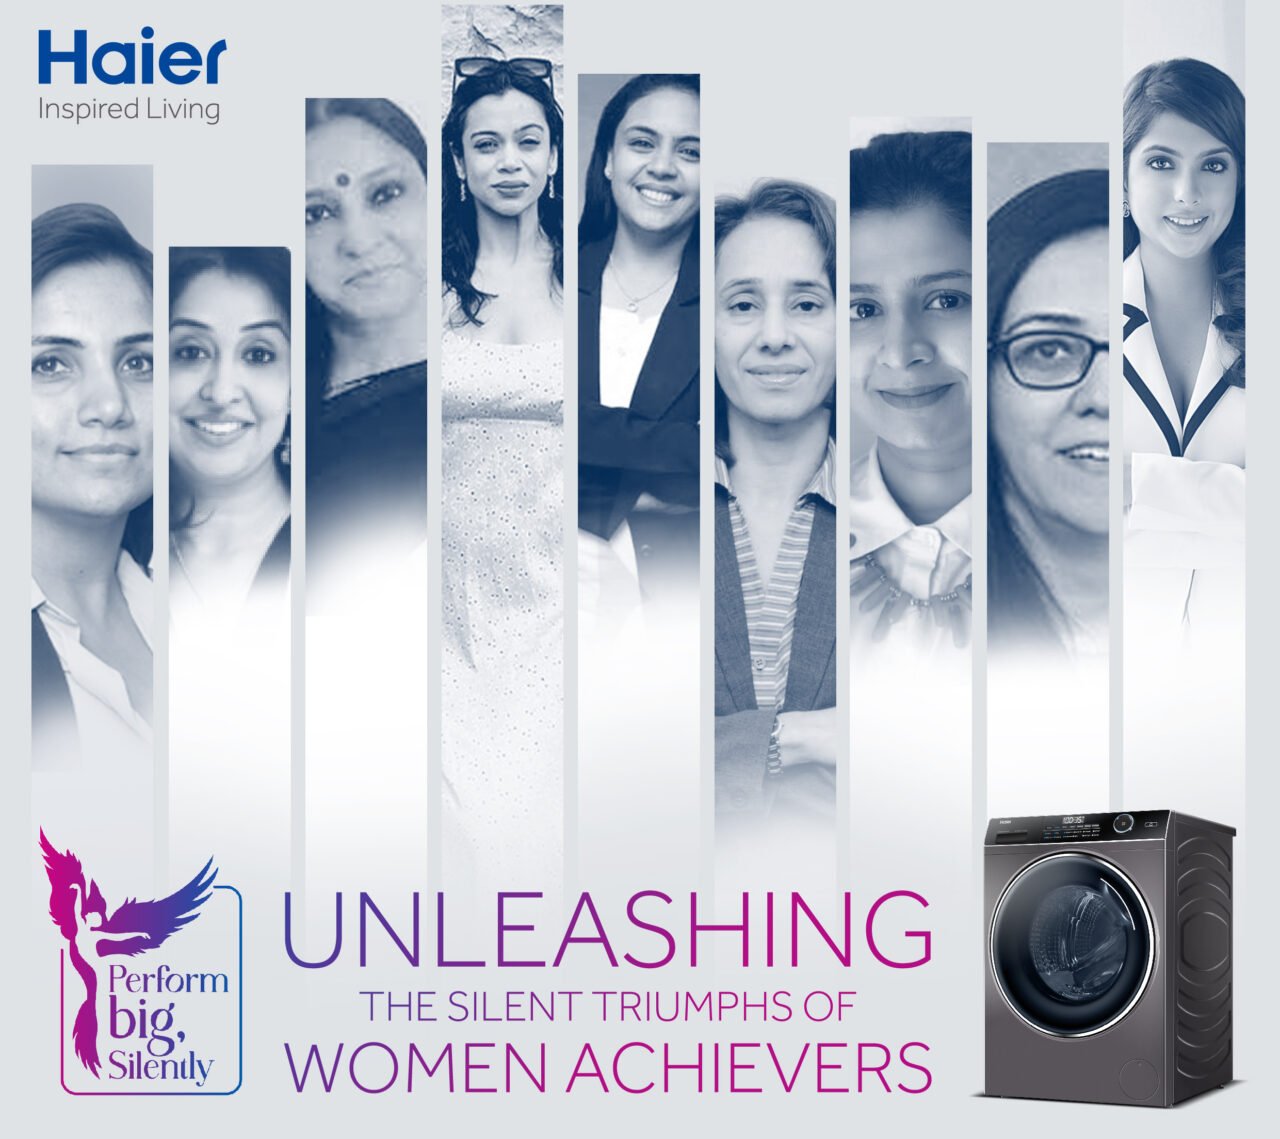 Haier's "Perform Big, Silently" Campaign Celebrates Women Achievers